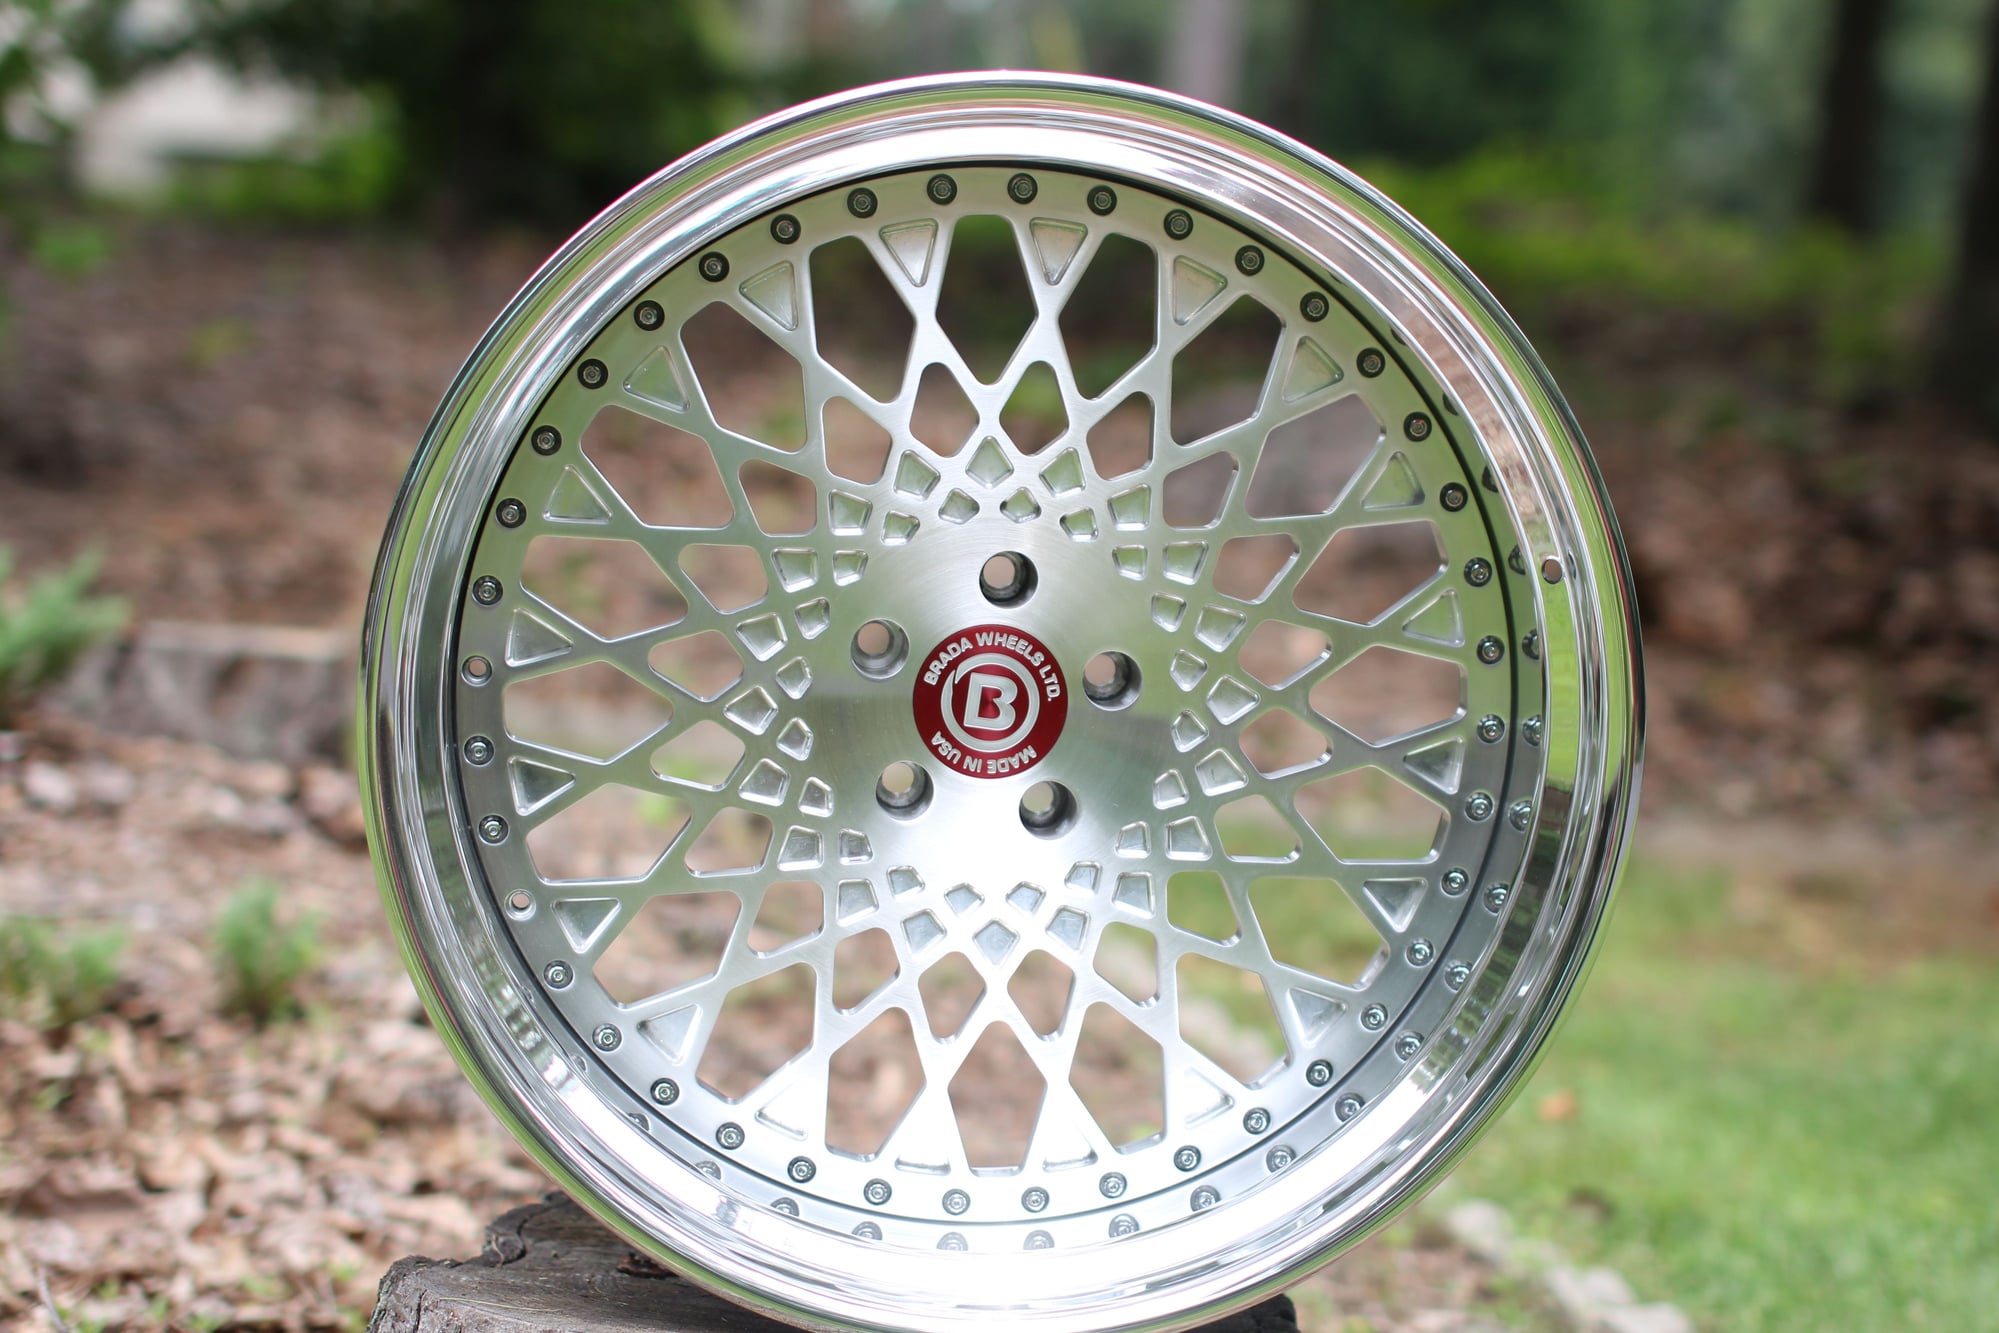 Extra Set of Brada Wheels BR1 in E55 fitment for deal! Forums